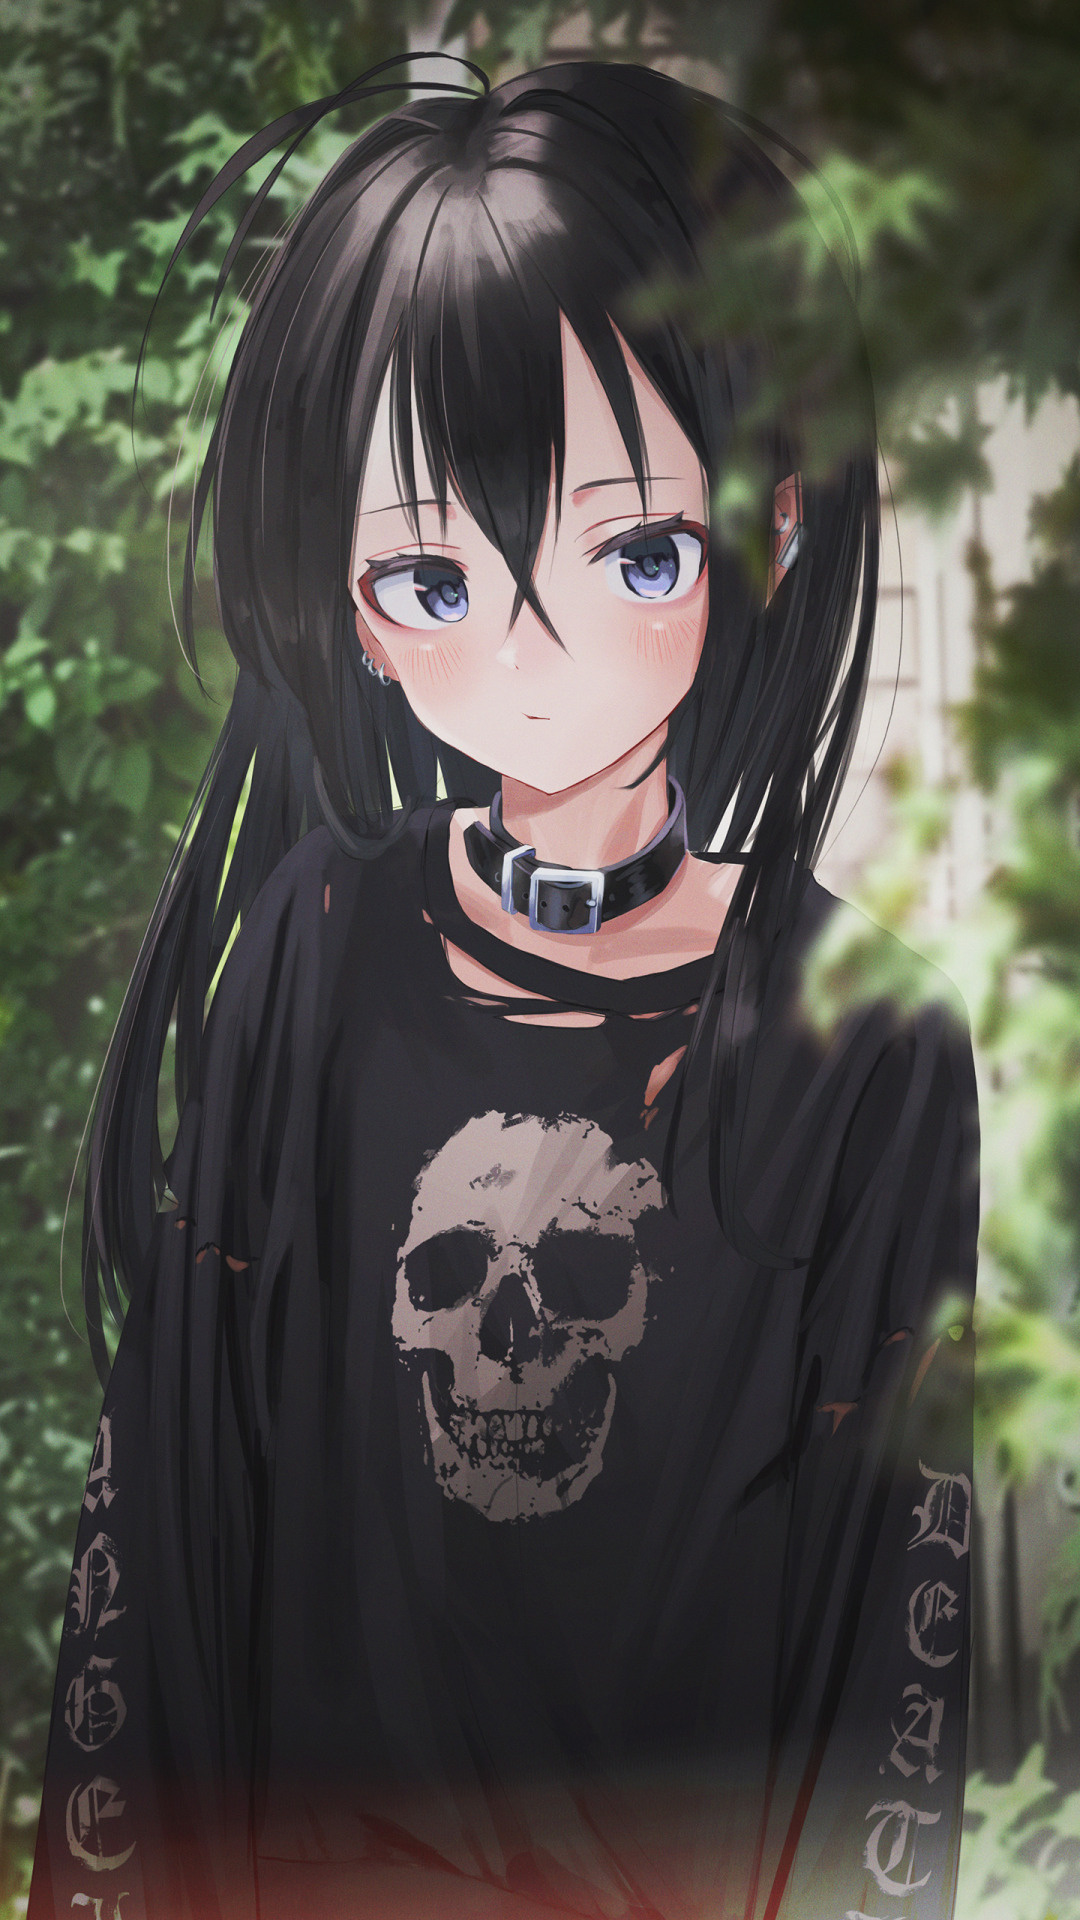 Goth Girl: Japanese anime and manga character, Skull, Gothic fashion and style, Dead inside. 1080x1920 Full HD Background.